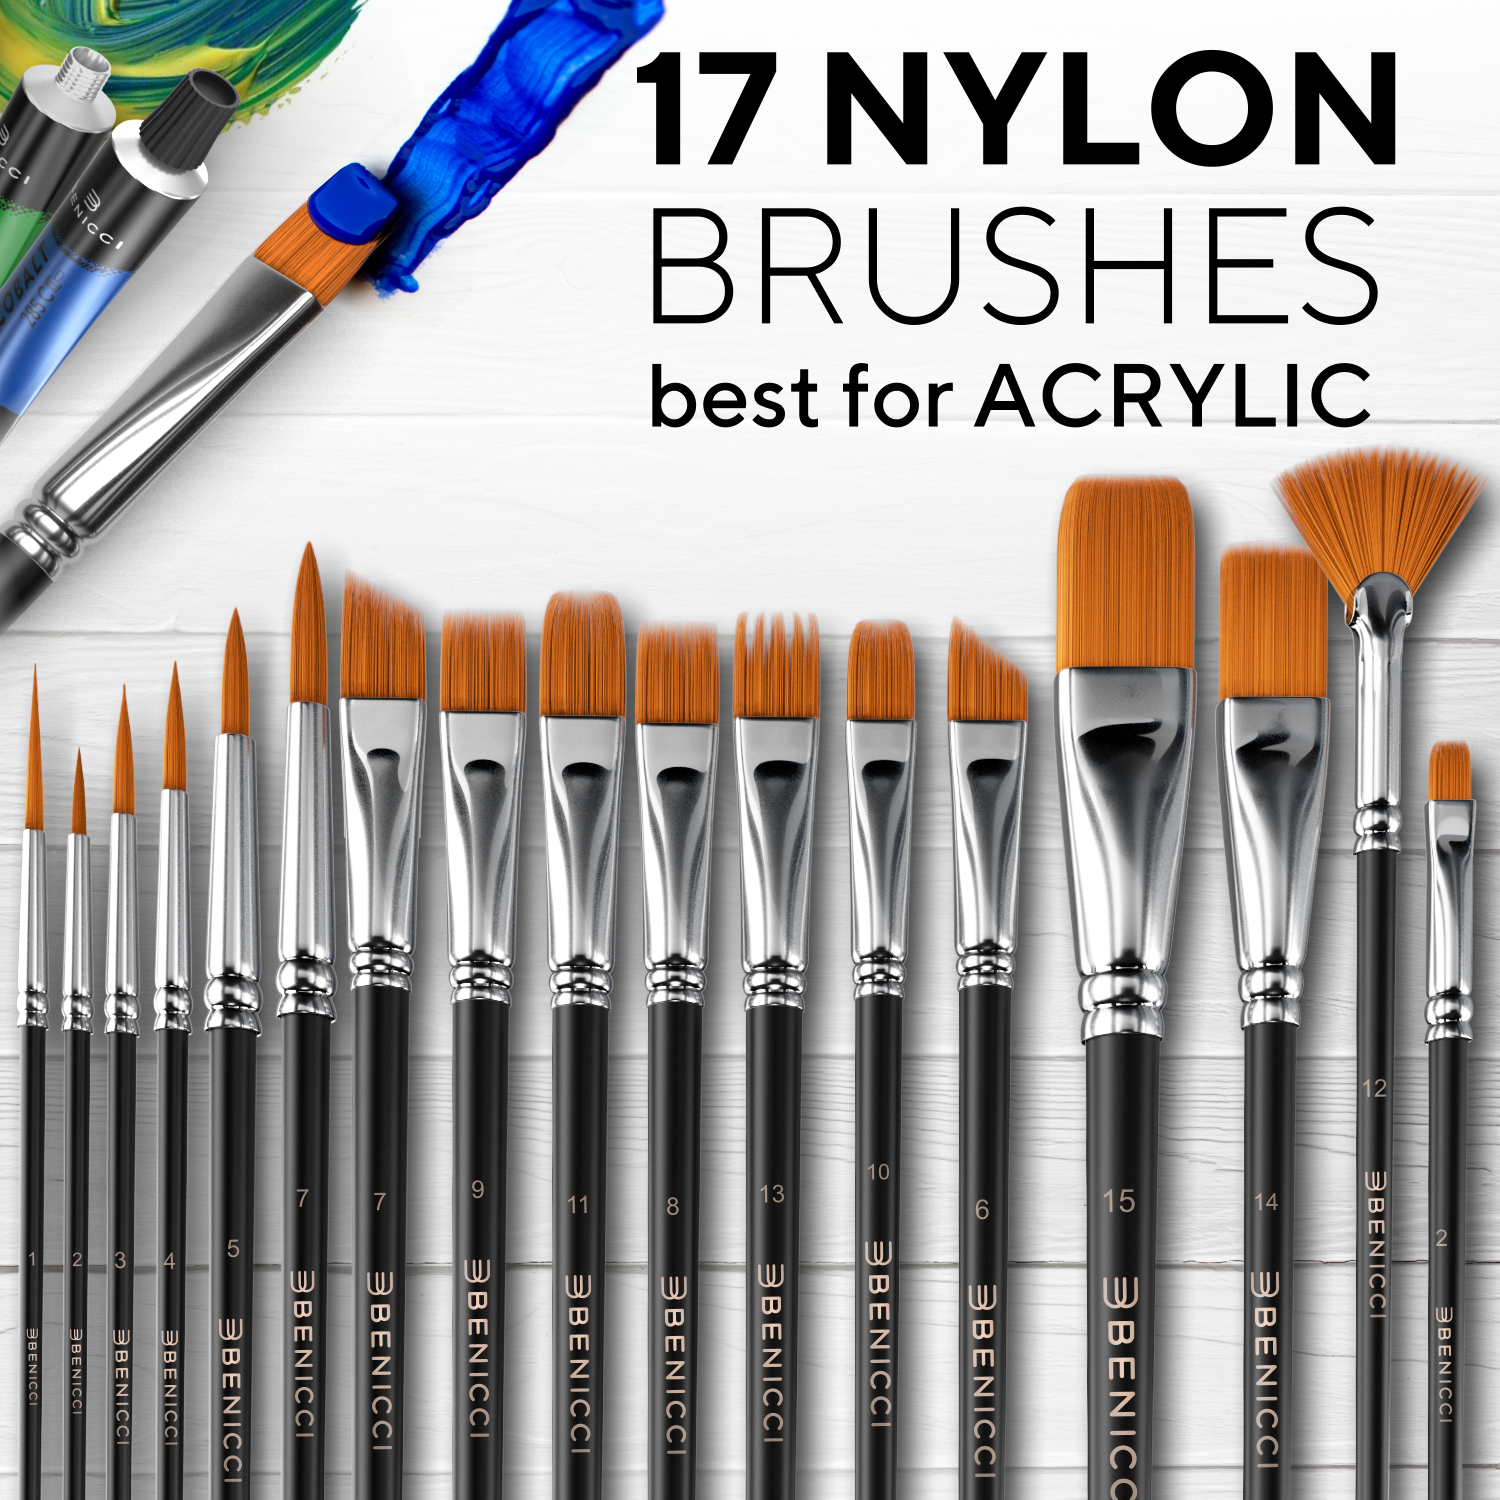 Craft Brushes Assorted Set 40 ct - The School Box Inc